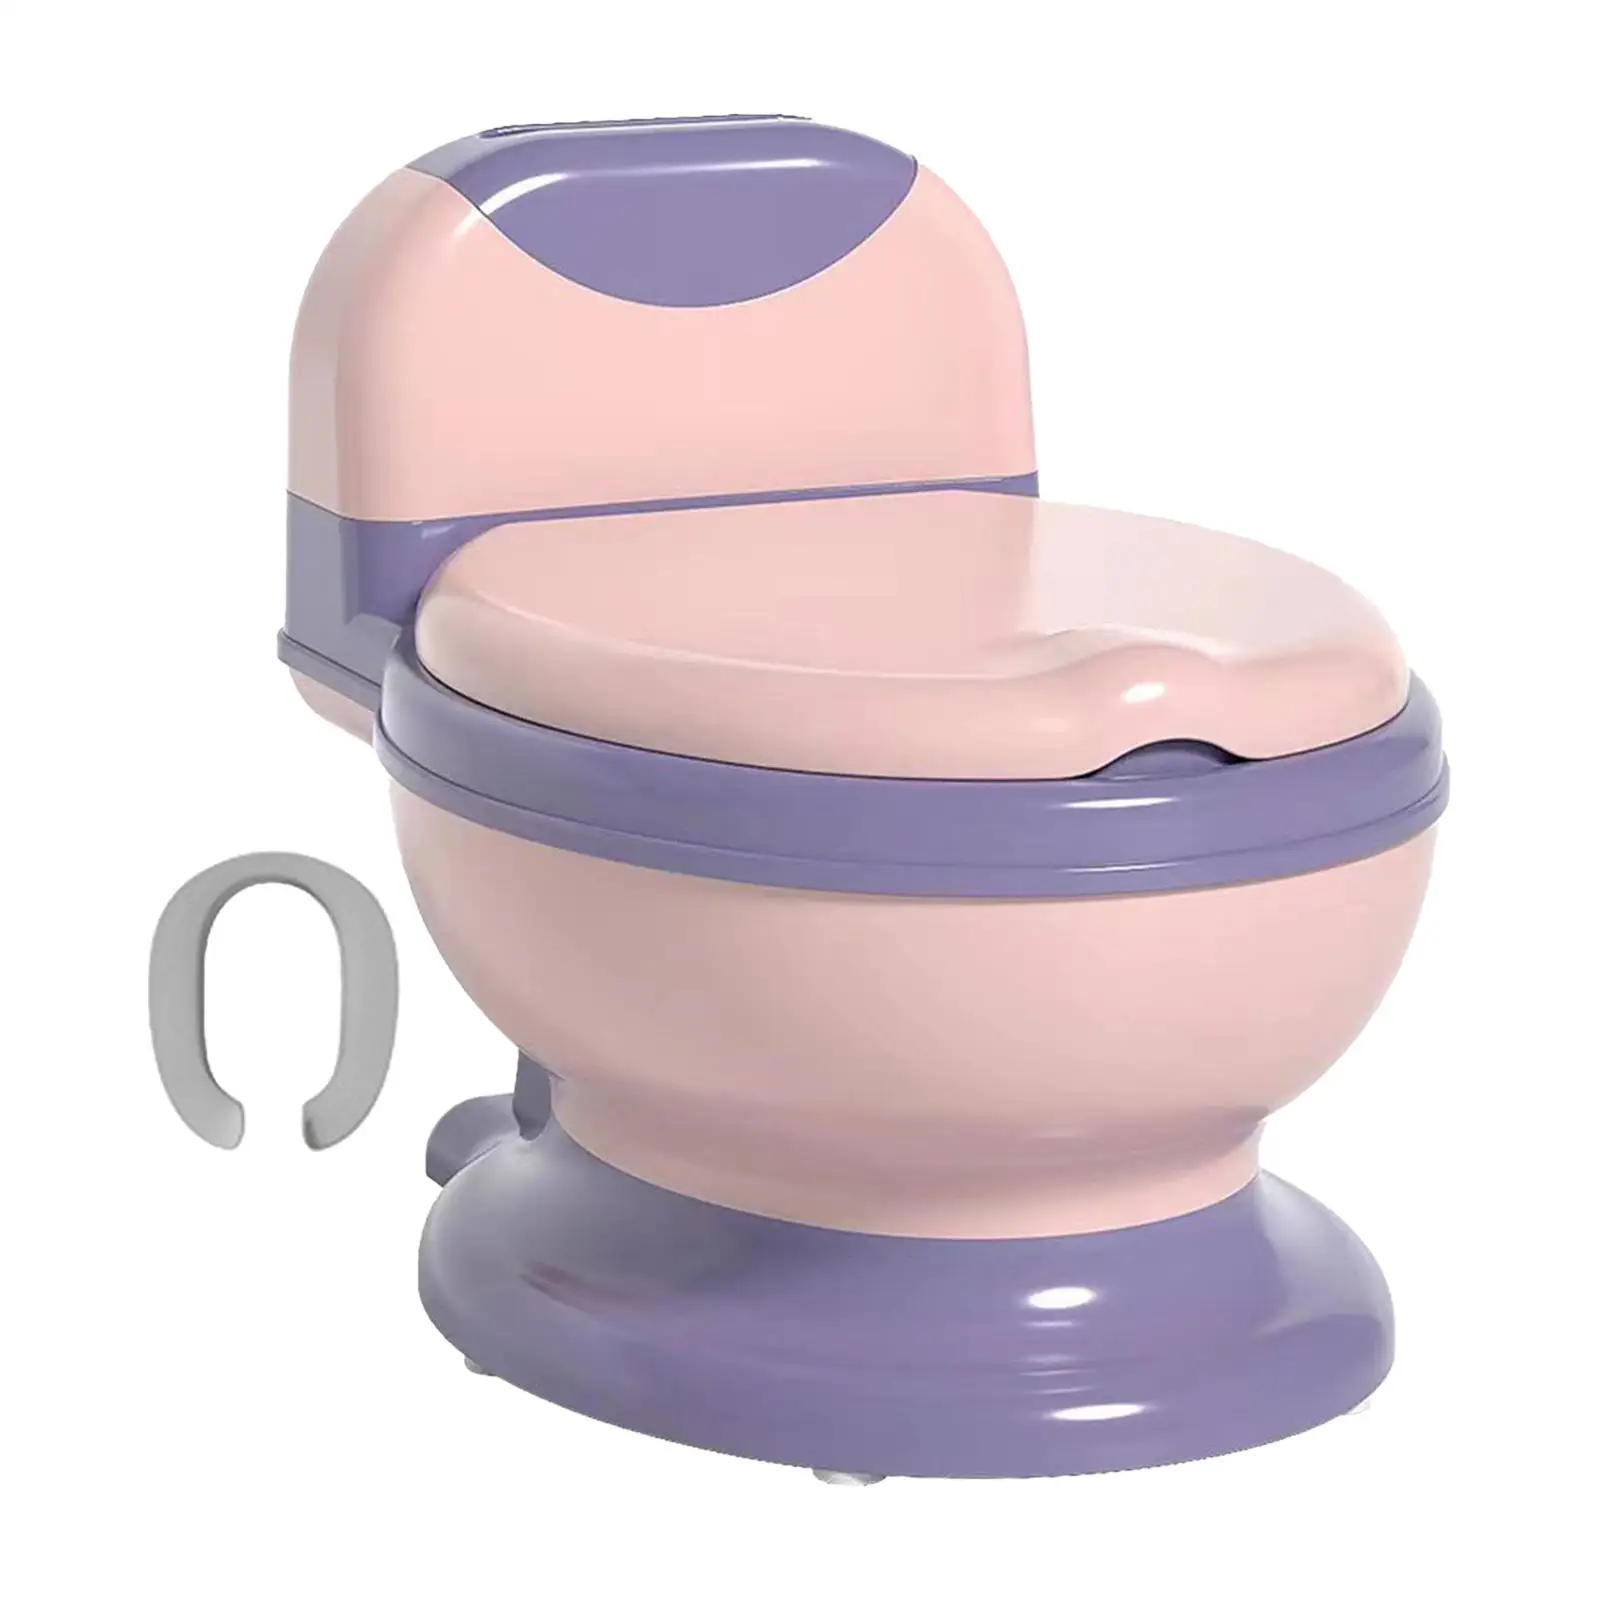 Potty Train Toilet Toilet Training Seat Potty Seat Portable Detachable Toddlers Potty Chair for Baby Kids Boys Girls Toddlers